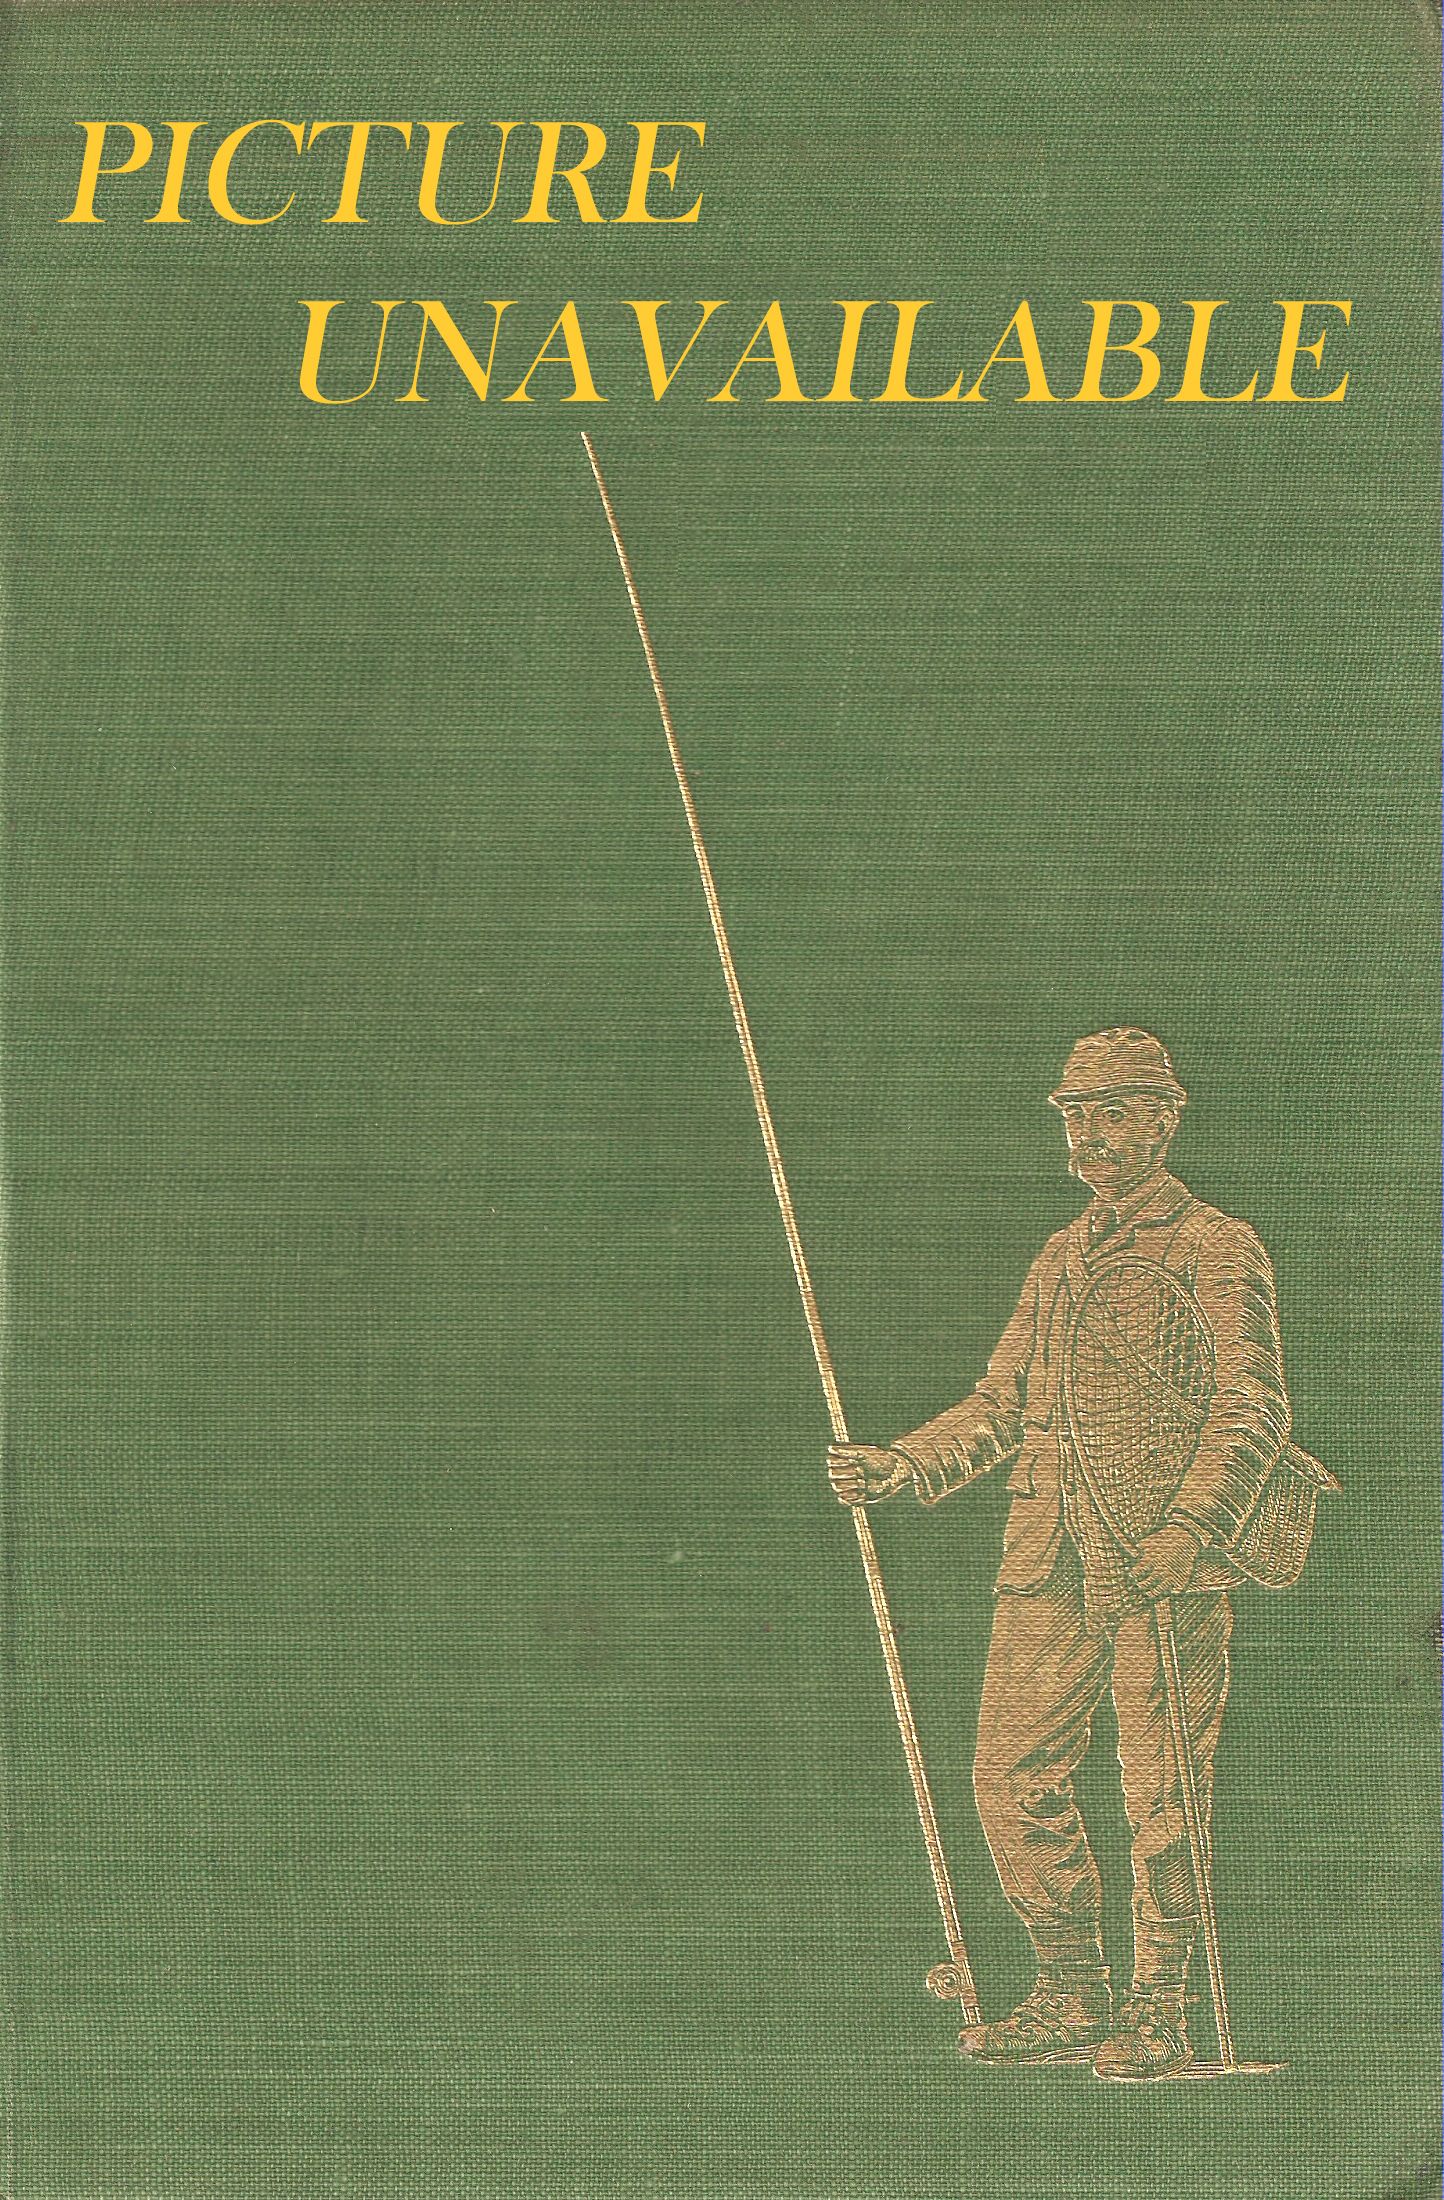 A MASTER'S GUIDE TO BUILDING A BAMBOO FLY ROD. By Everett Garrison and Hoagy  B. Carmichael.